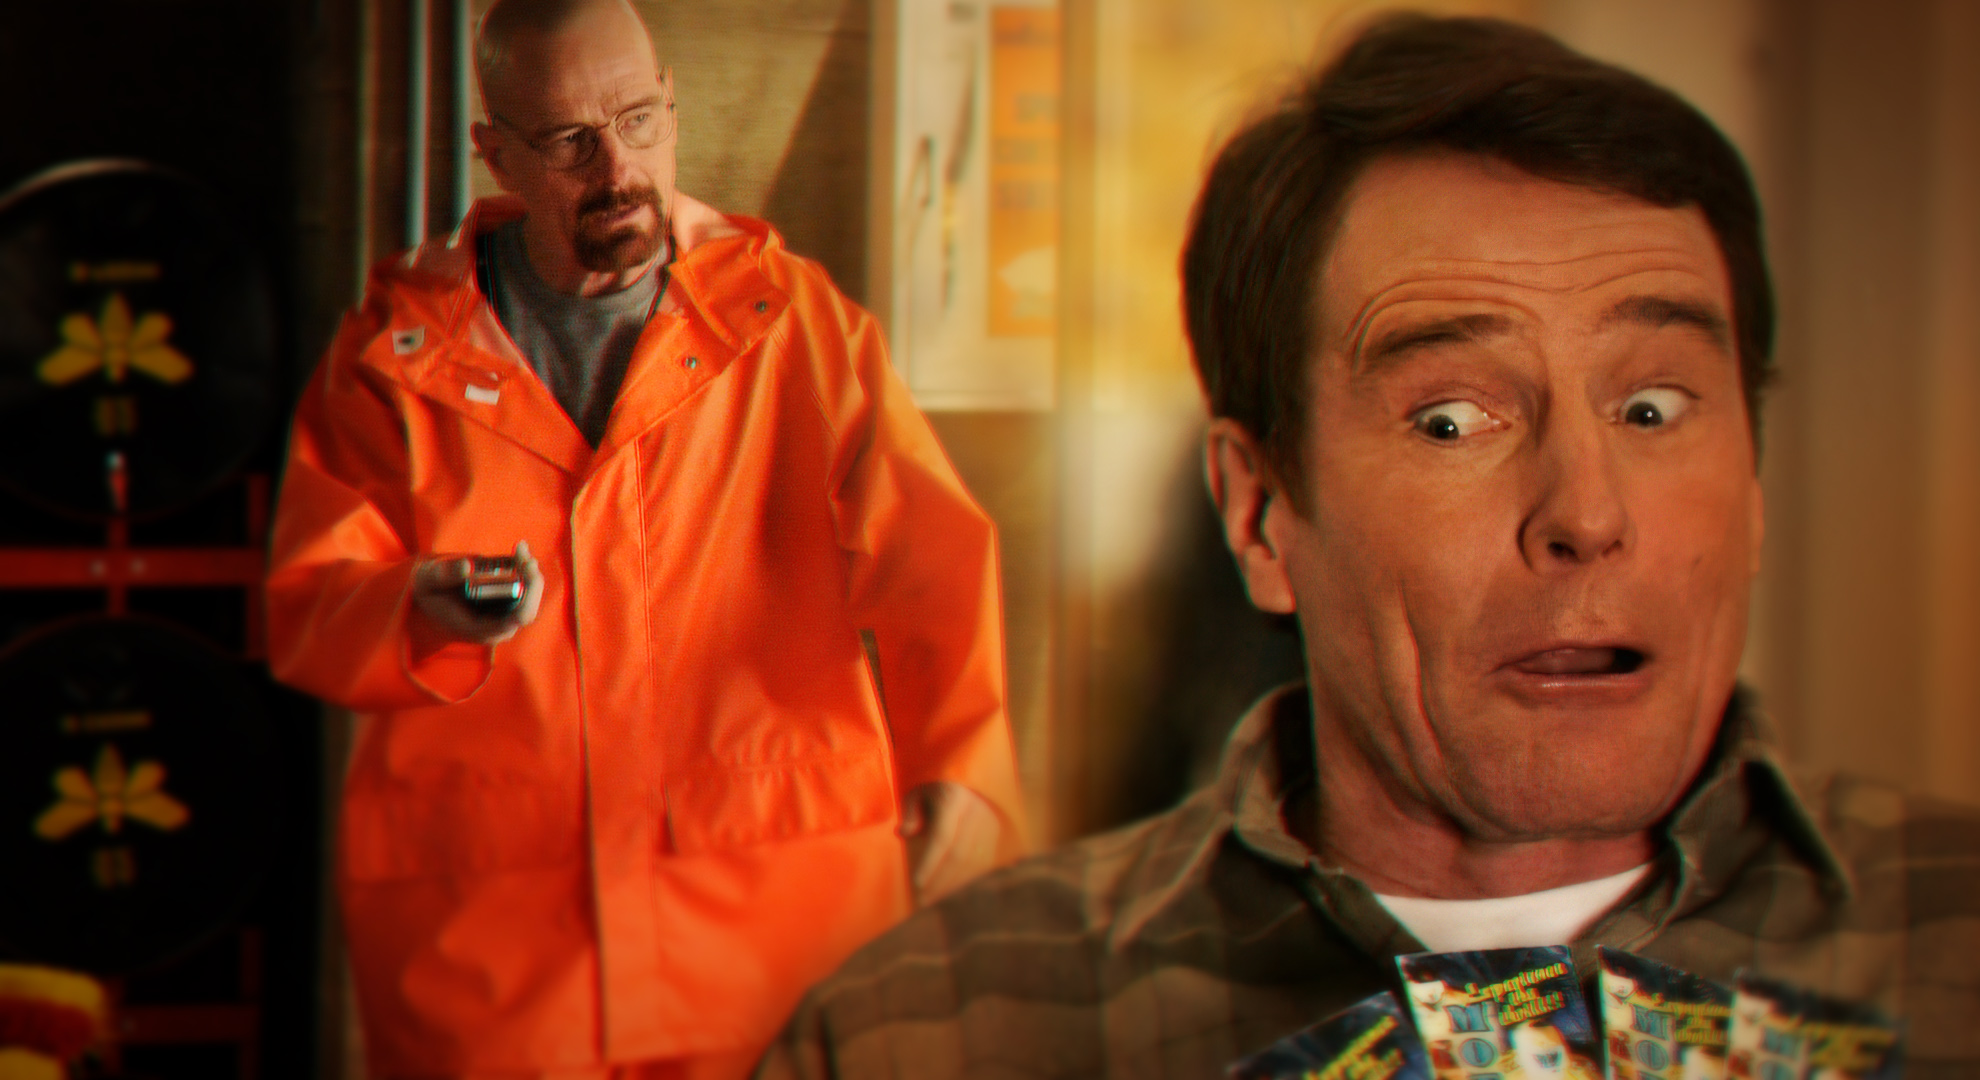 More Than Just Breaking Bad Bryan Cranstons Best Roles Ranked